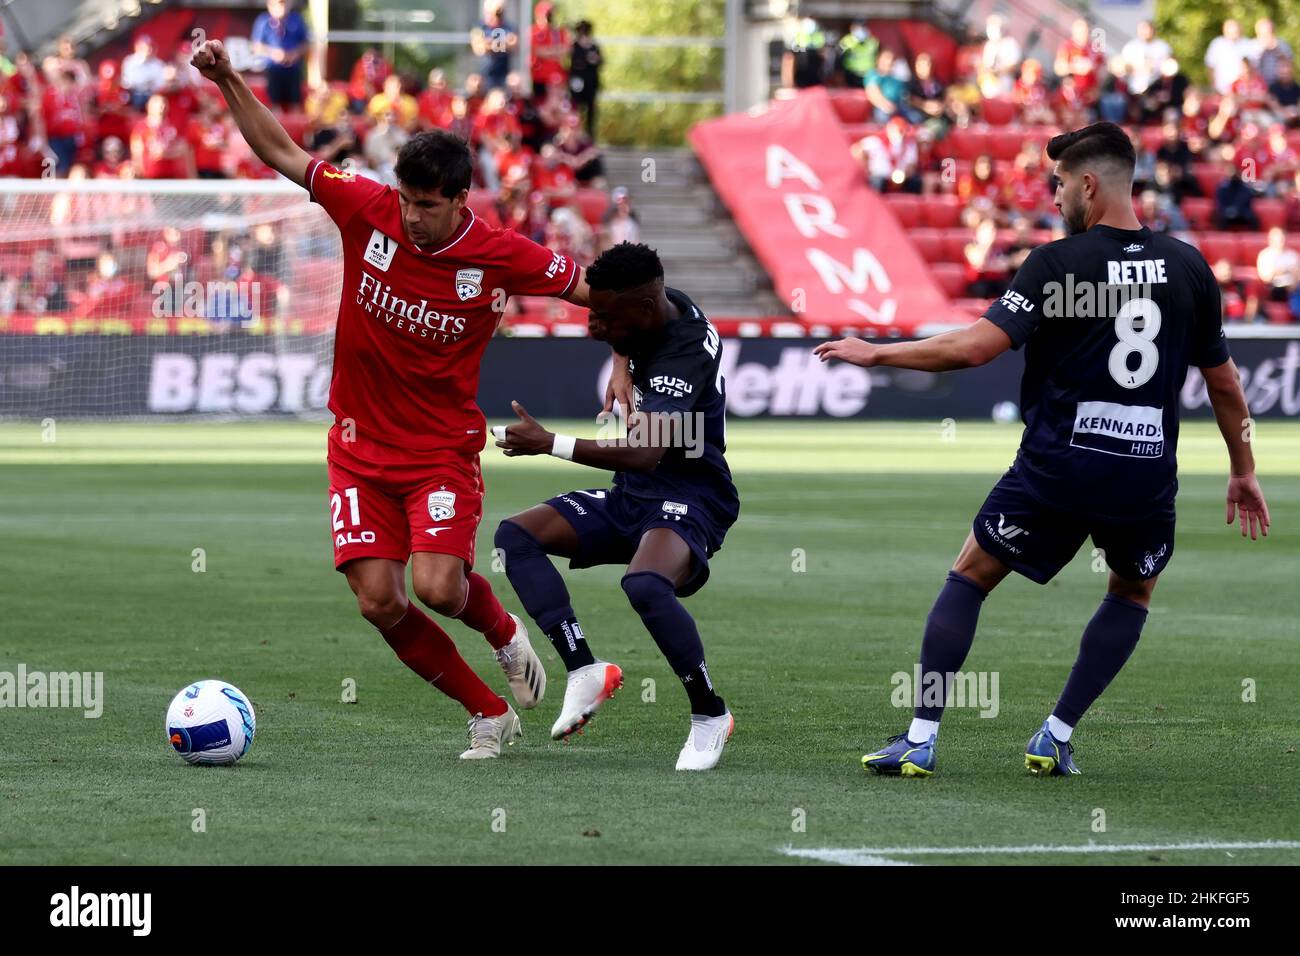 Adelaide, Australia, 4 February, 2022. Javier López Rodriguez of Adelaide United attacks the ball during the A-League soccer match between Adelaide United and Sydney FC. Credit: Peter Mundy/Speed Media/Alamy Live News Stock Photo